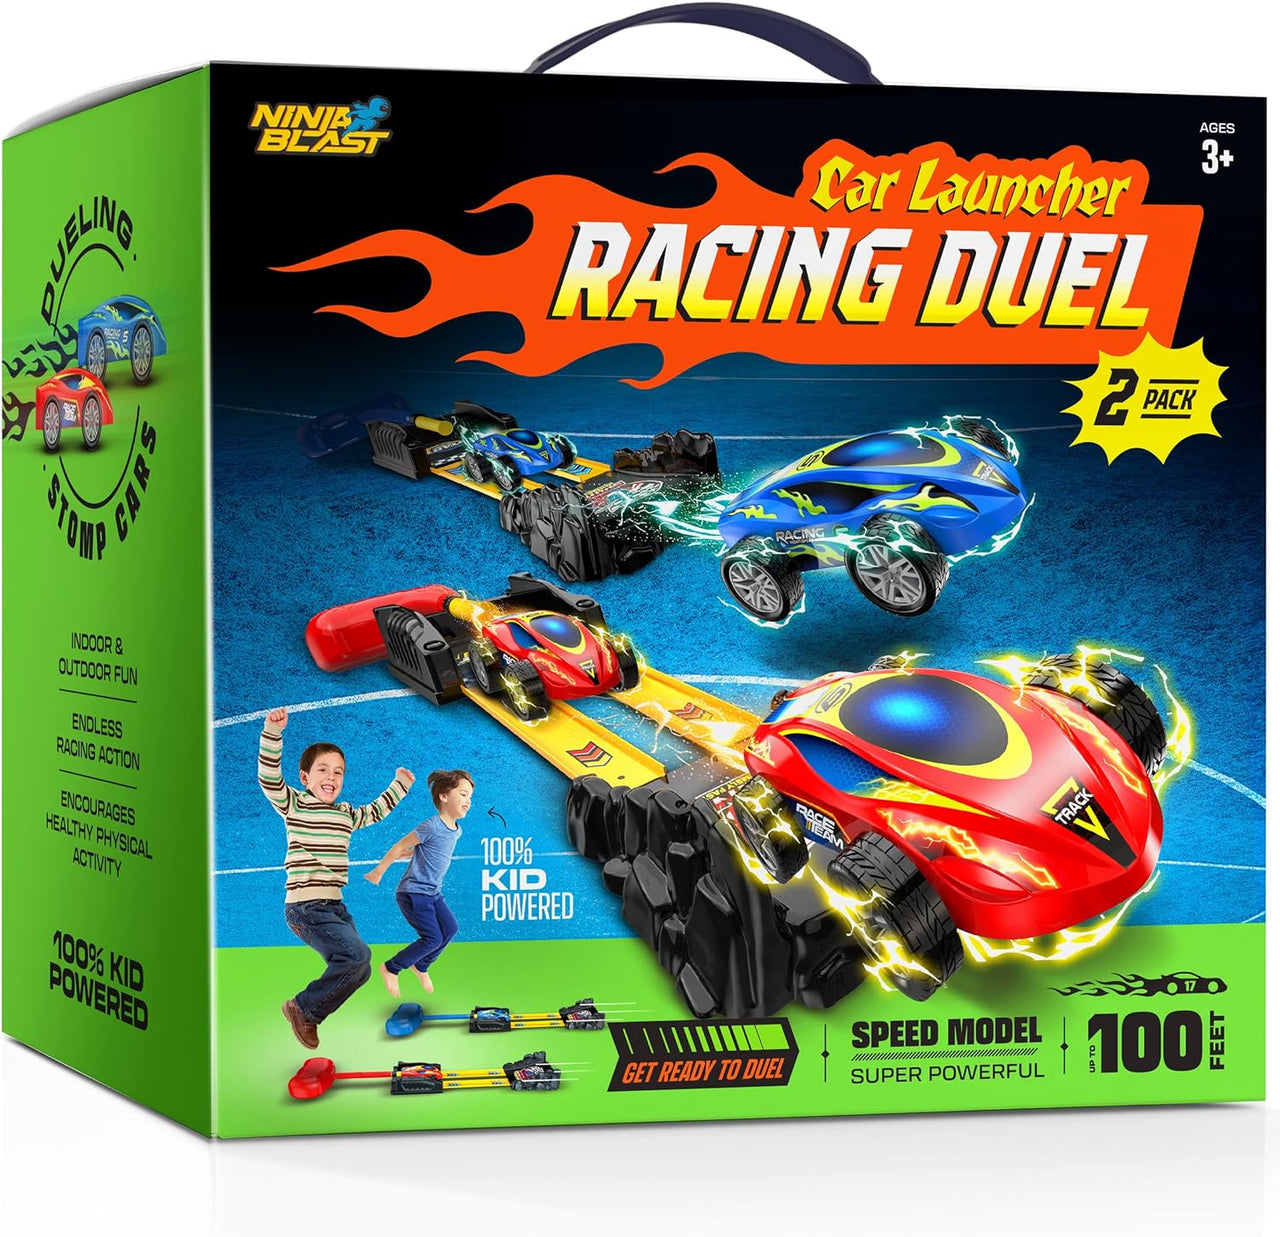 Car Launcher Racing Track Set Toy